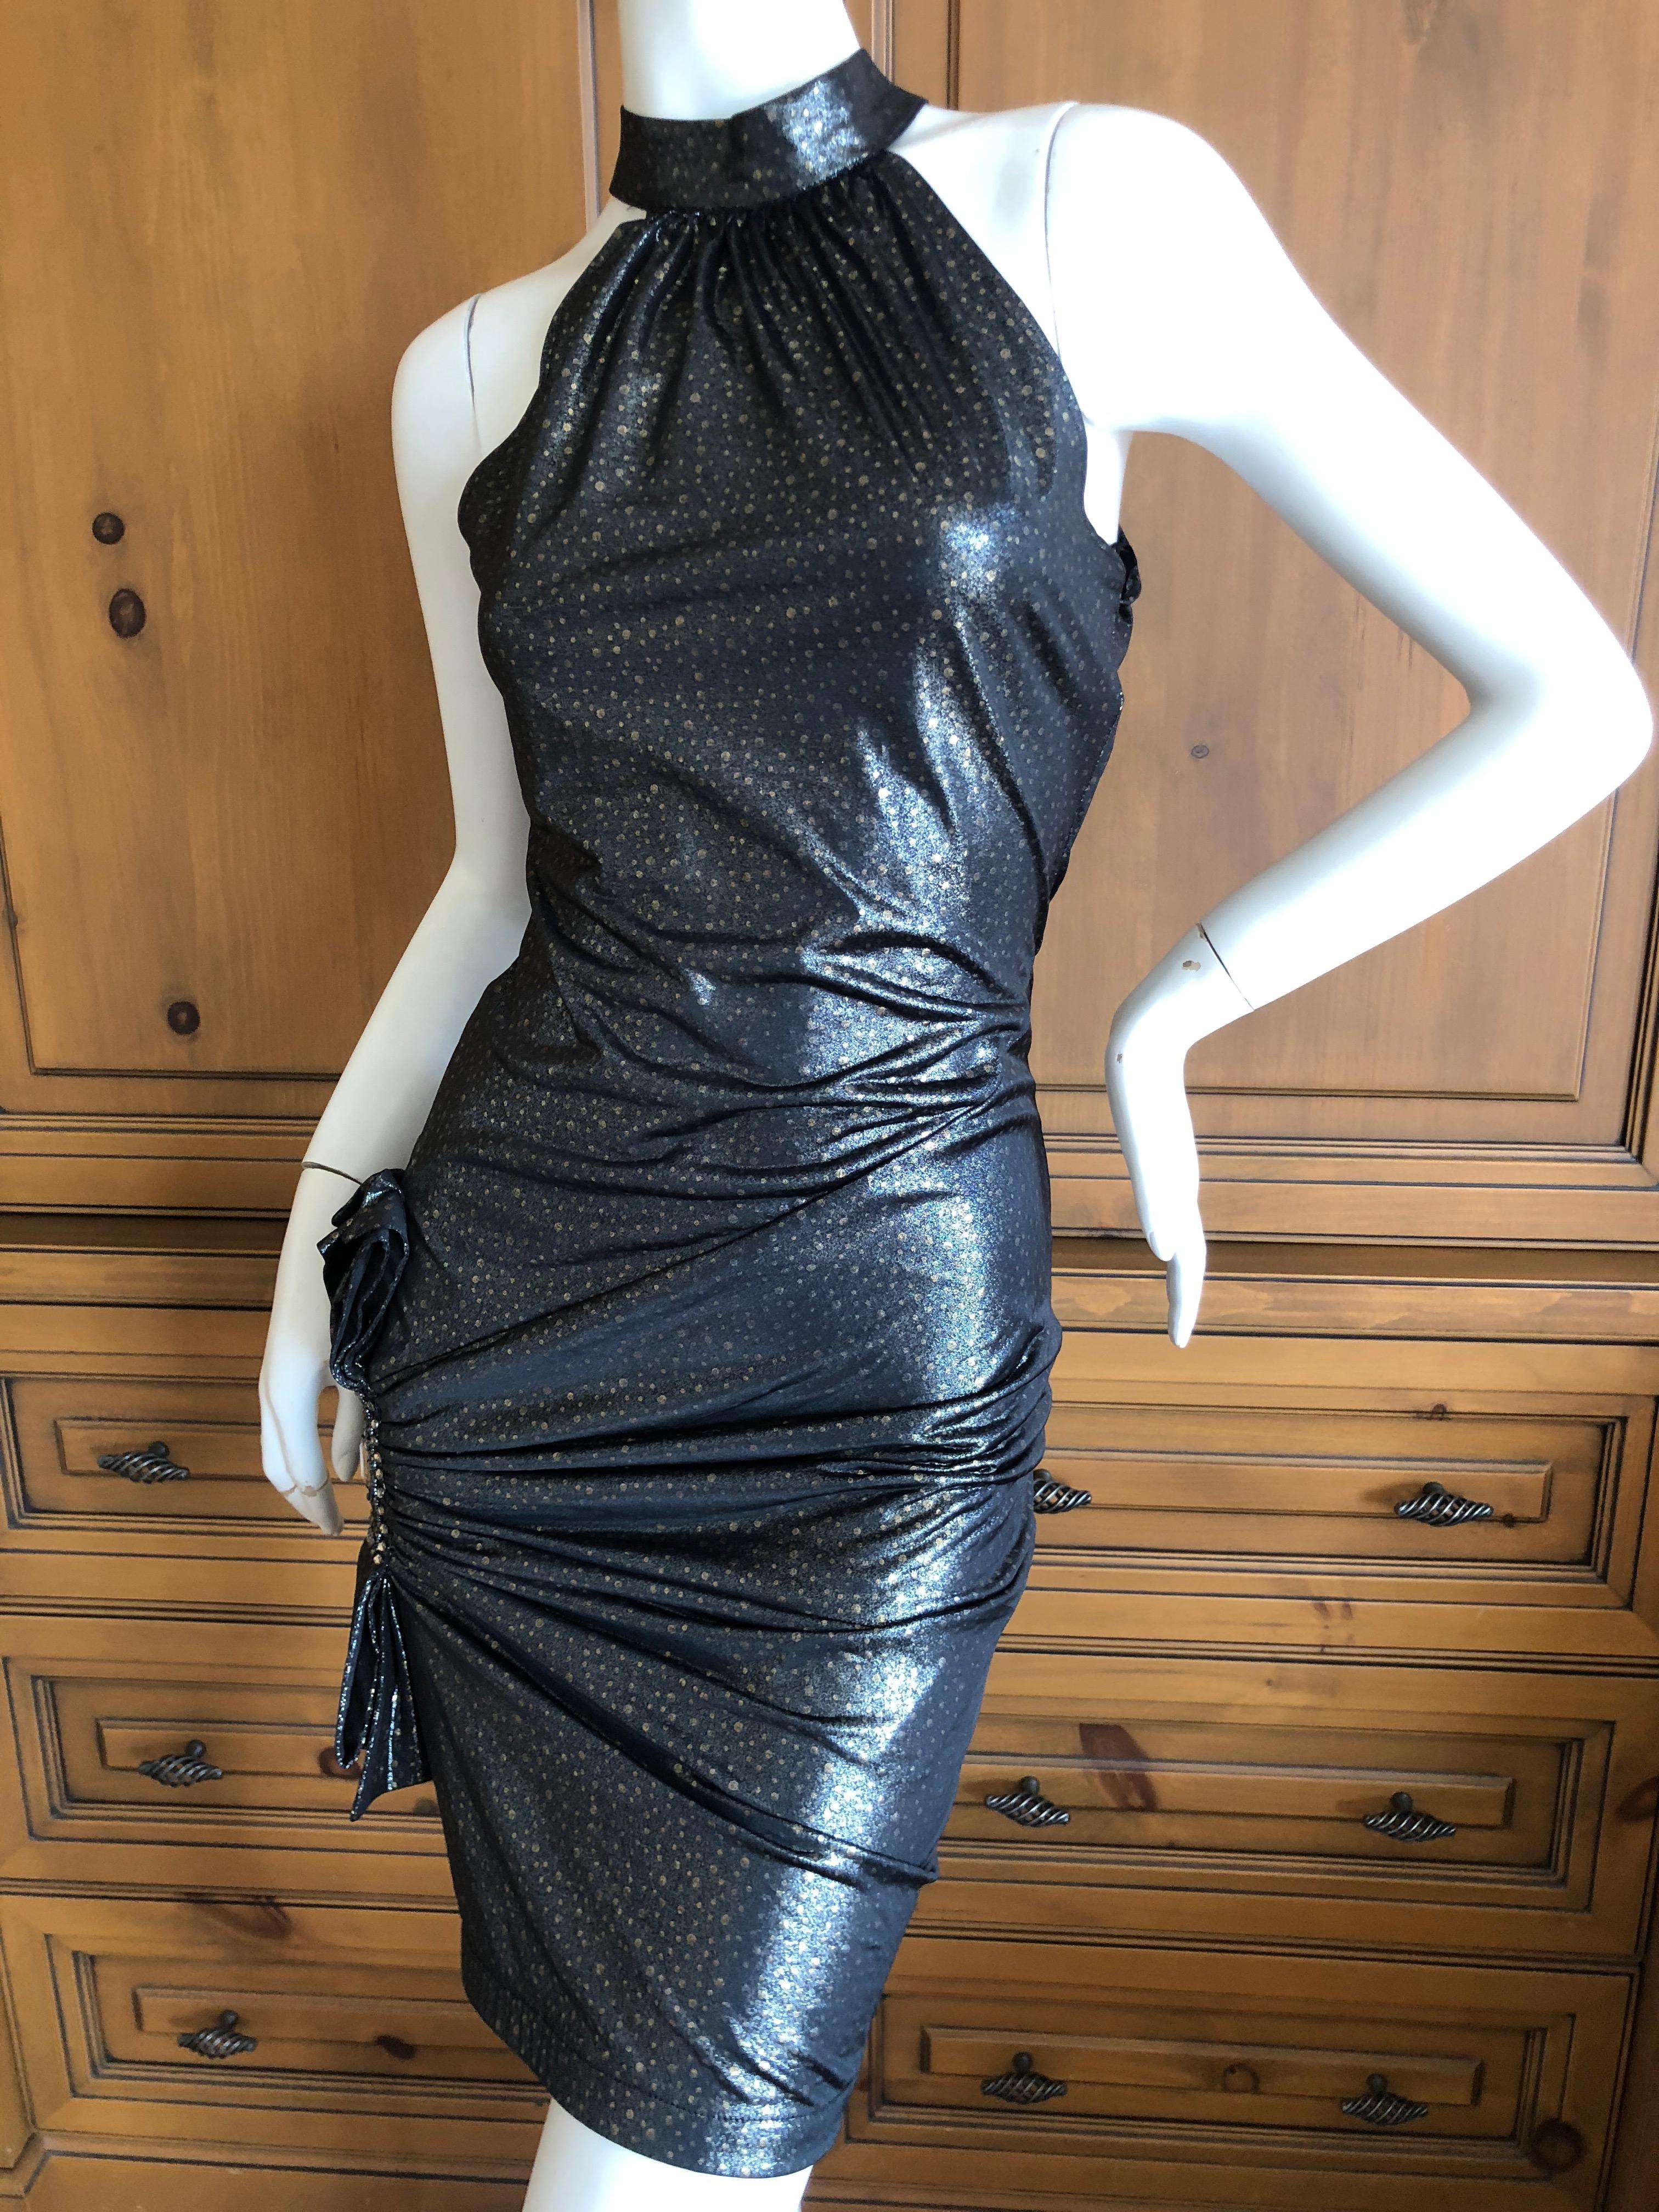 Roberto Cavalli Vintage 1980's Shimmery Stretch Dress with Embellished Hip
Lots of stretch

Bust  34